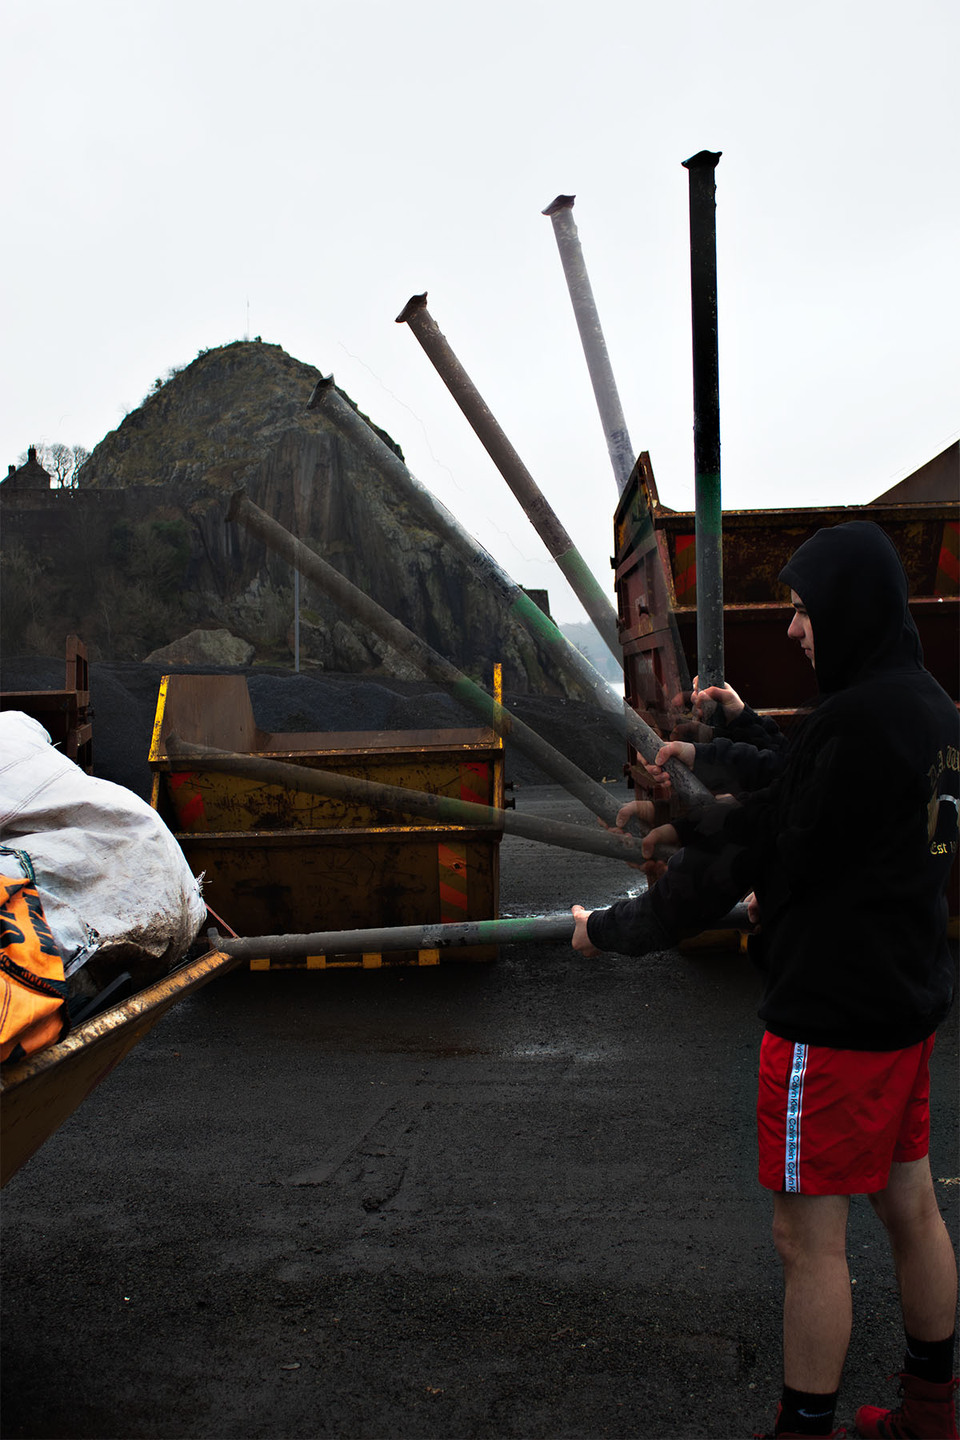 Young man in black hoodie and red shorts swings a metal pole in an industrial site 